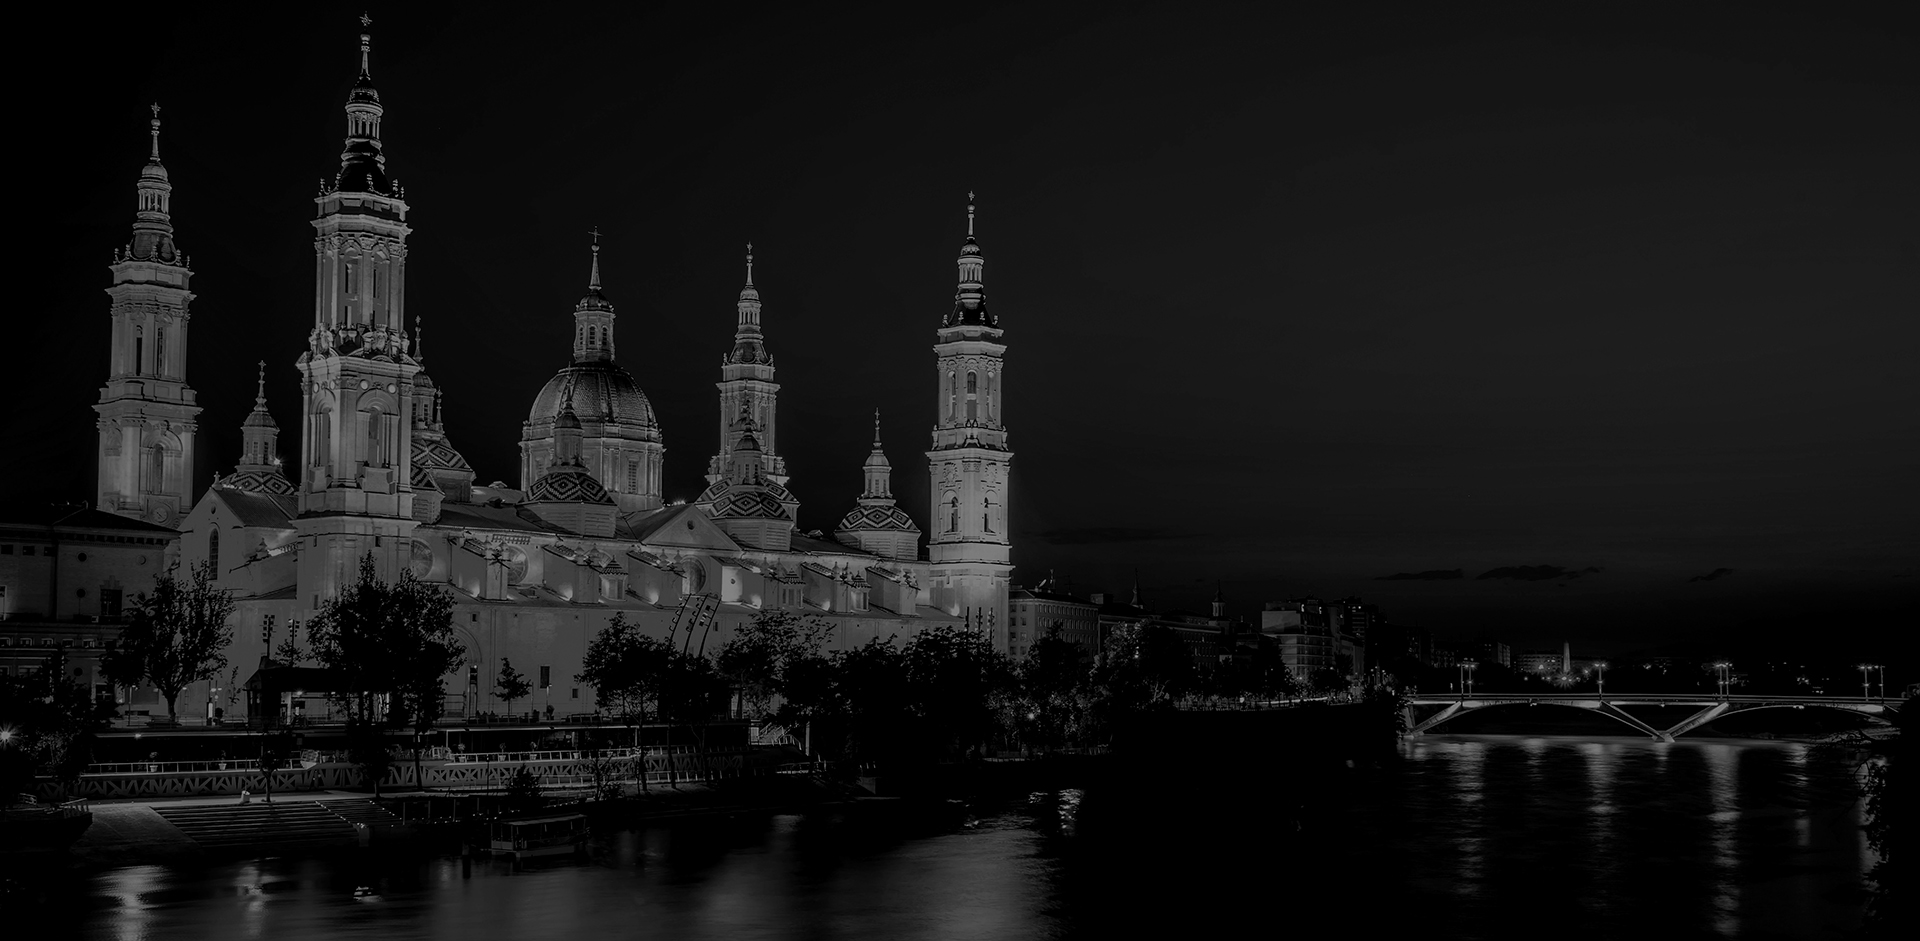 Great evening view of the Pilar Cathedral in Zaragoza, Spain